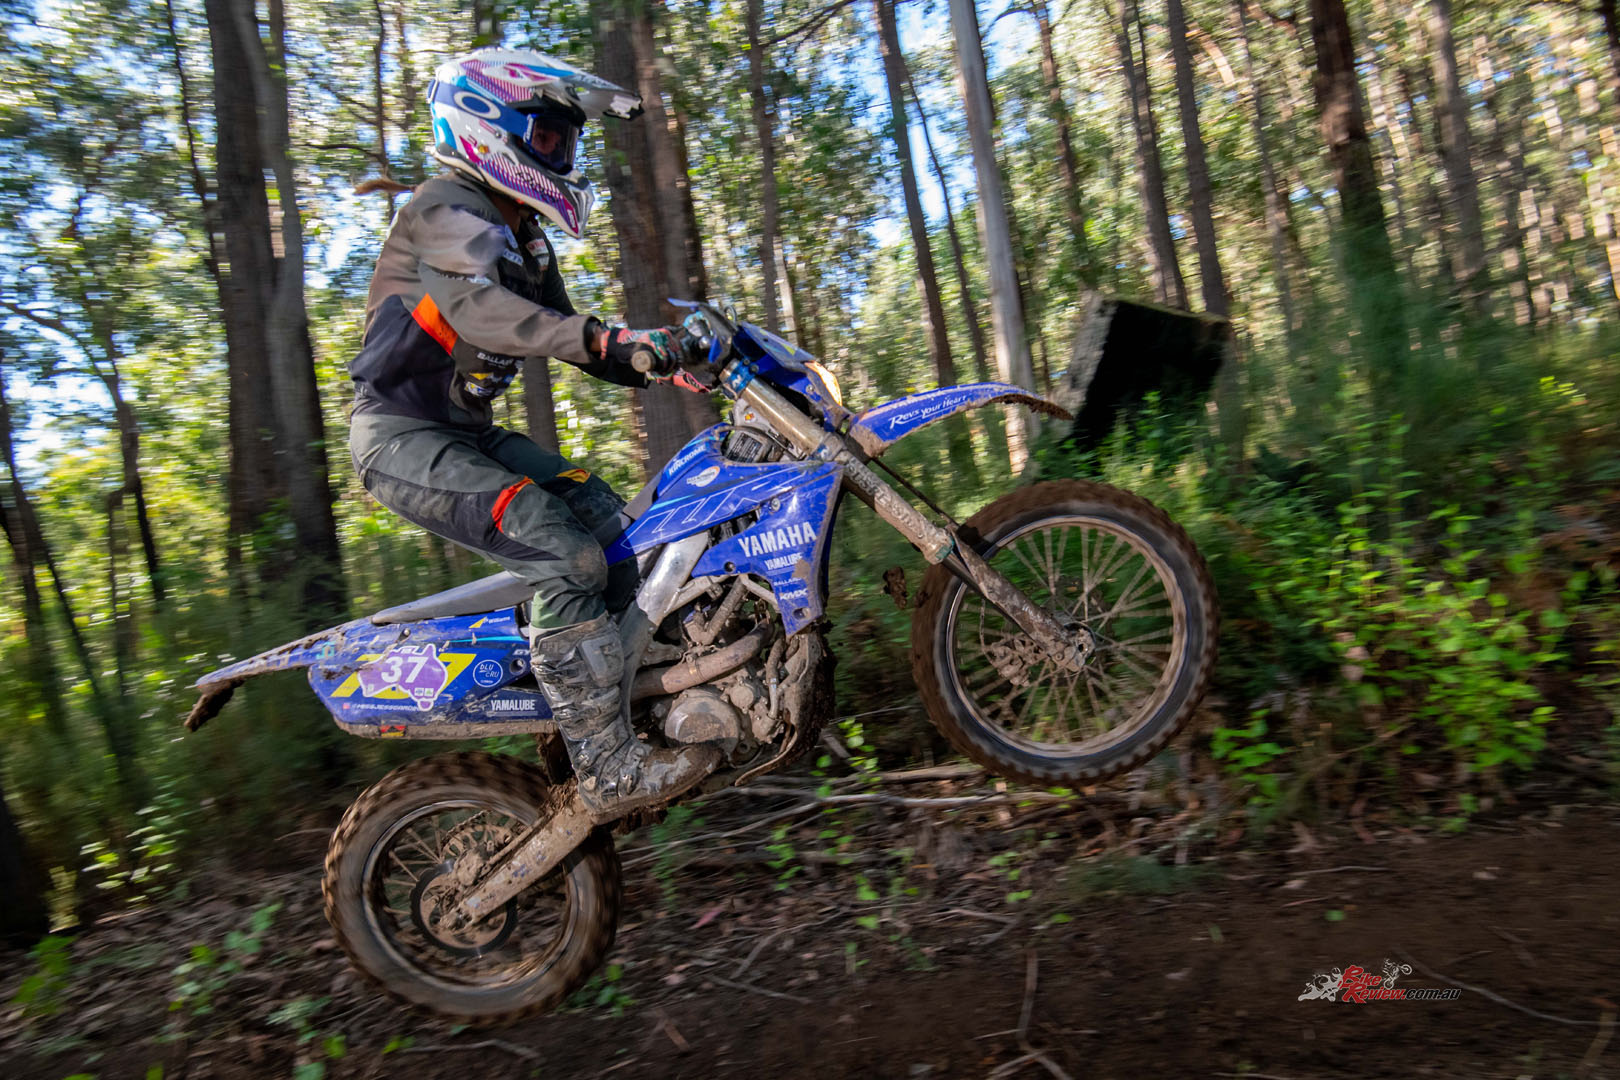 The Erica conditions is clearly treating Yamaha’s Gardiner to a spectacular A4DE, as she took out another Women’s class win!